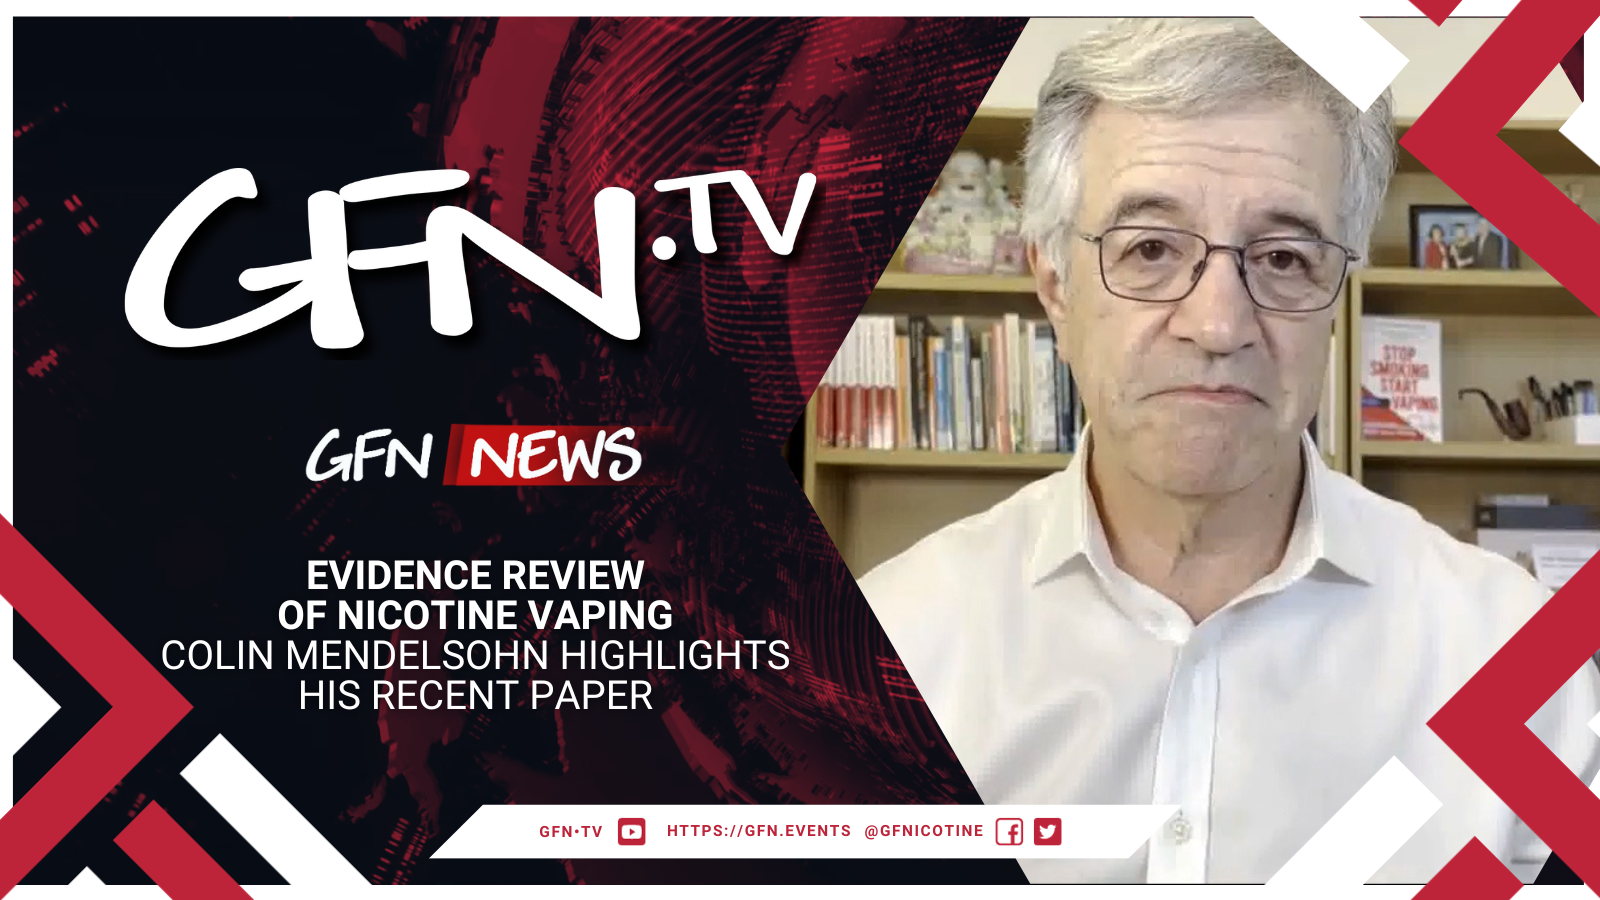 GFN News #74 | EVIDENCE REVIEW OF NICOTINE VAPING | Colin Mendelsohn highlights his recent paper